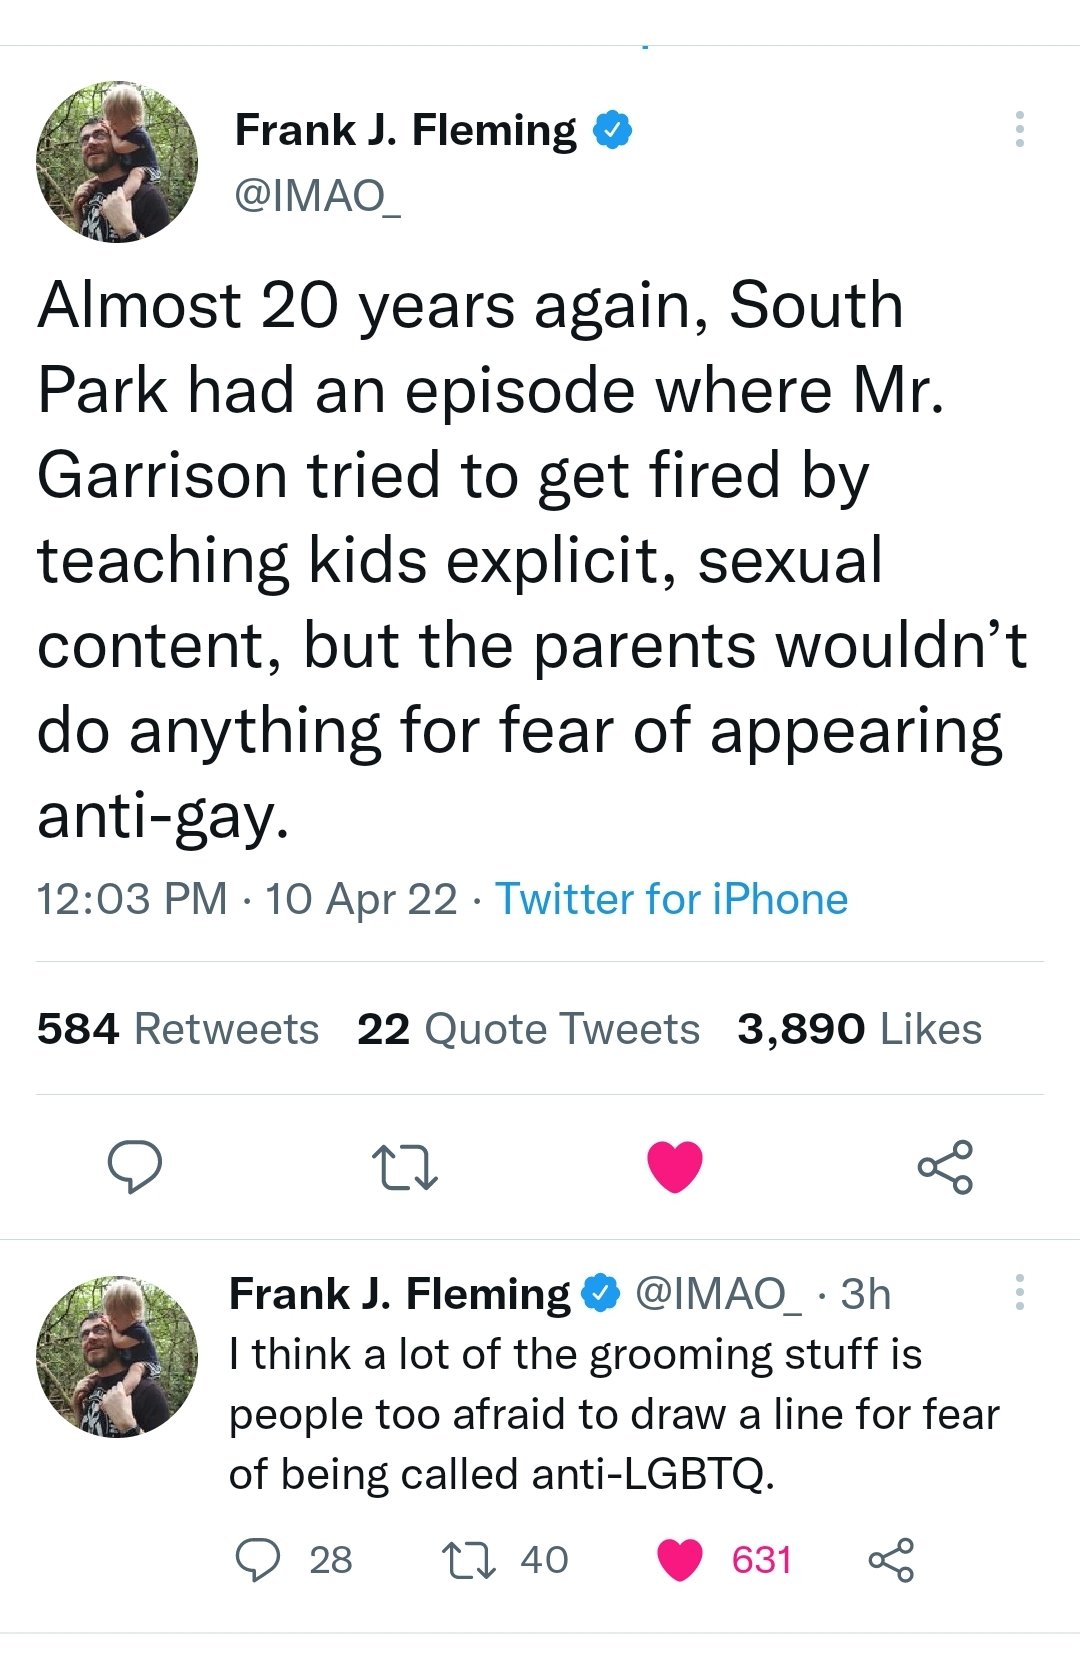 DAILY WIRE: Almost 20 years again, South Park had an episode where Mr. Garrison tried to get fired by teaching kids explicit, sexual content, but the parents wouldn’t do anything for fear of appearing anti-gay. – The Donald